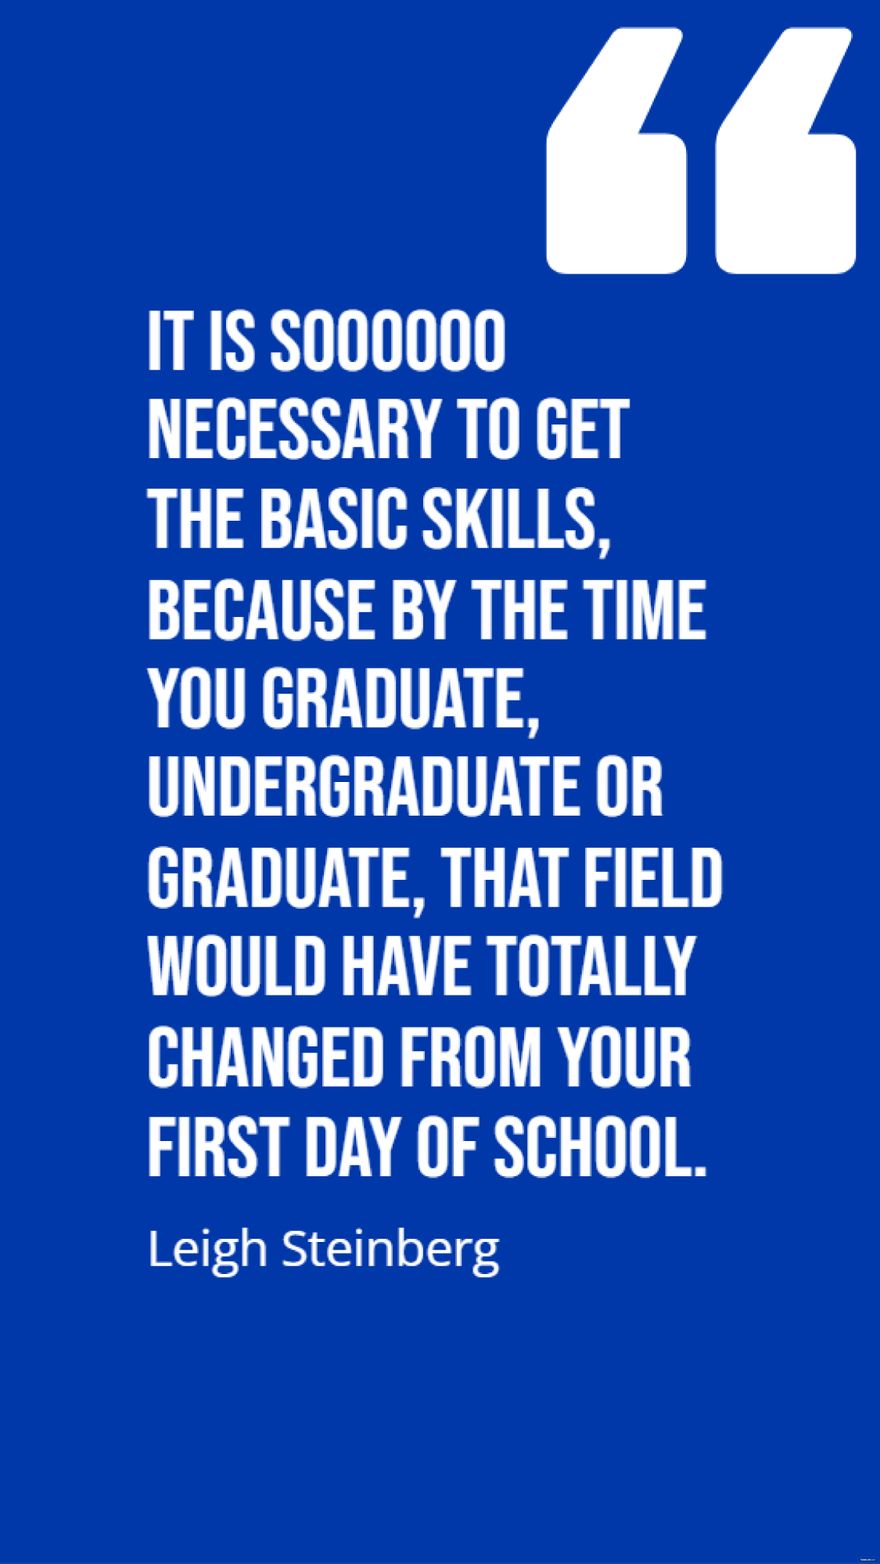 Free Leigh Steinberg - It is soooooo necessary to get the basic skills, because by the time you graduate, undergraduate or graduate, that field would have totally changed from your first day of school. in JPG